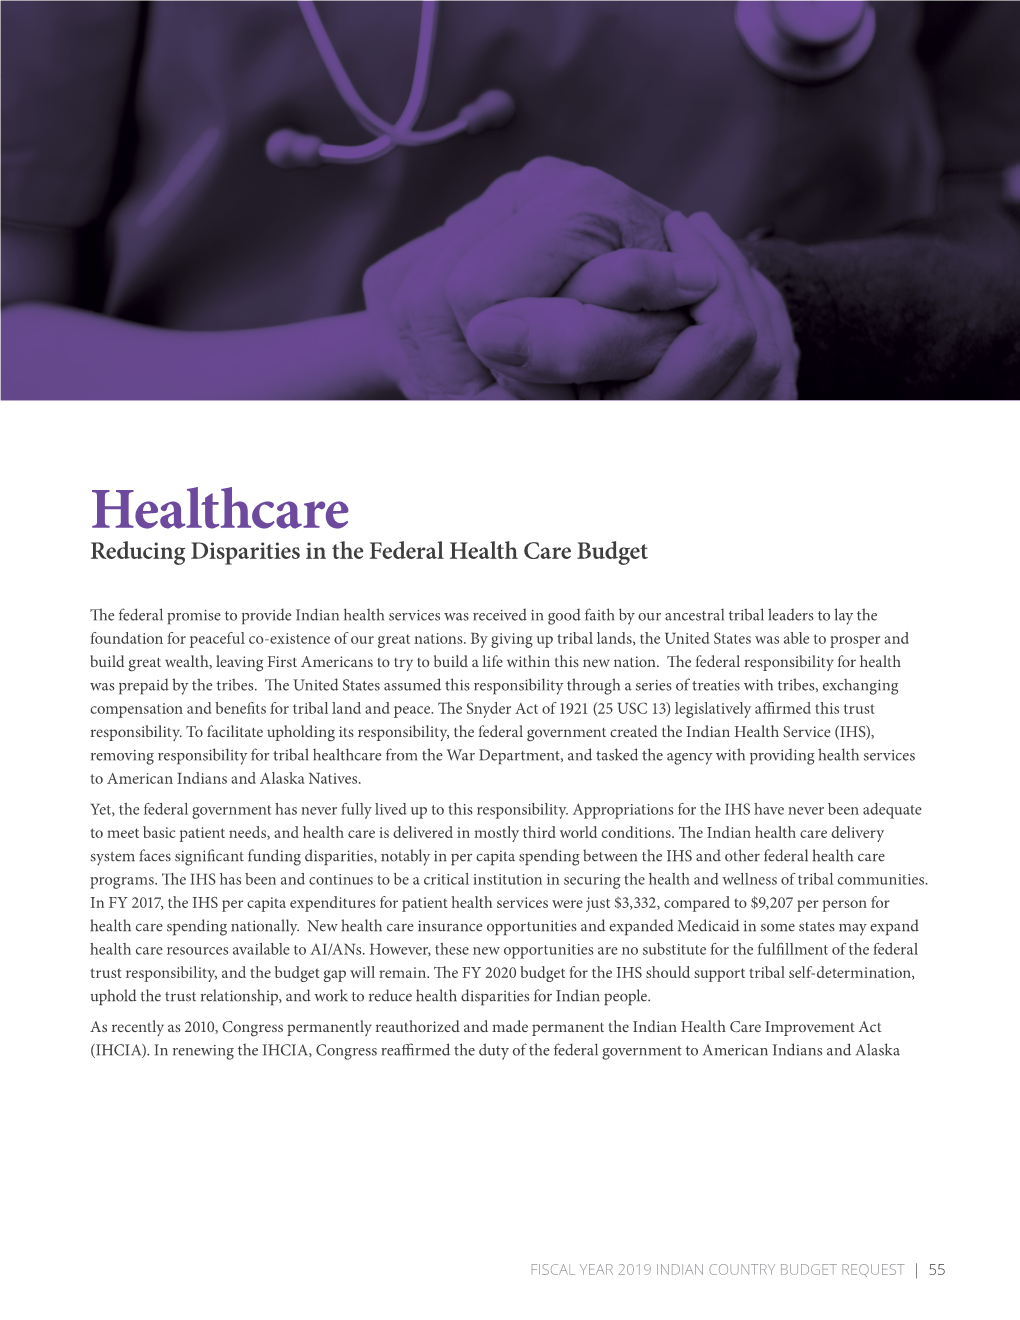 Healthcare Reducing Disparities in the Federal Health Care Budget